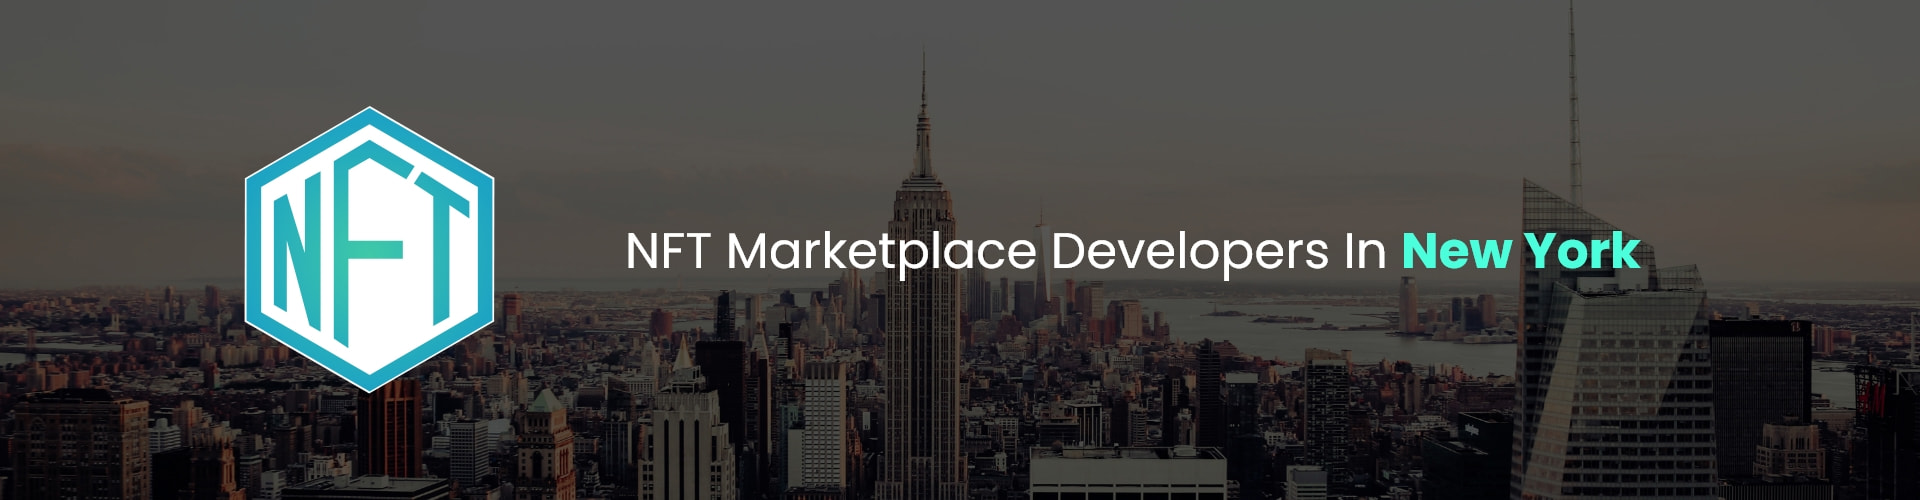 hire nft marketplace developers in new york